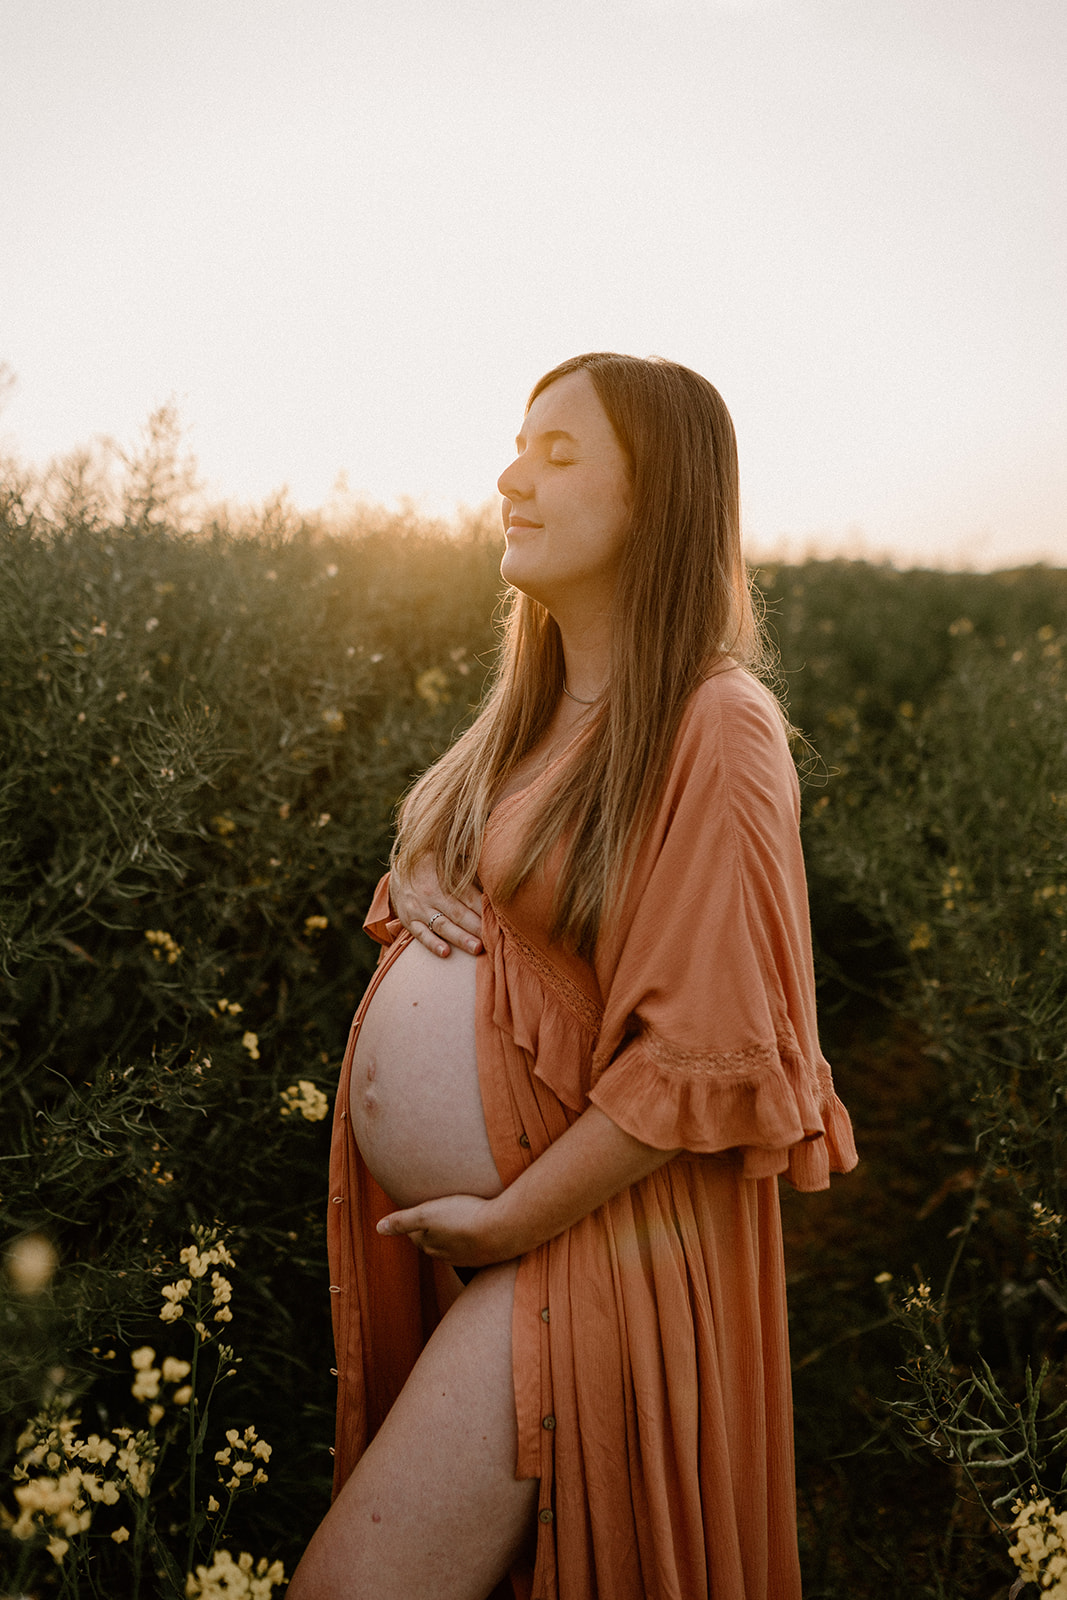 Expectant mother cradles bump during golden hour maternity photoshoot.